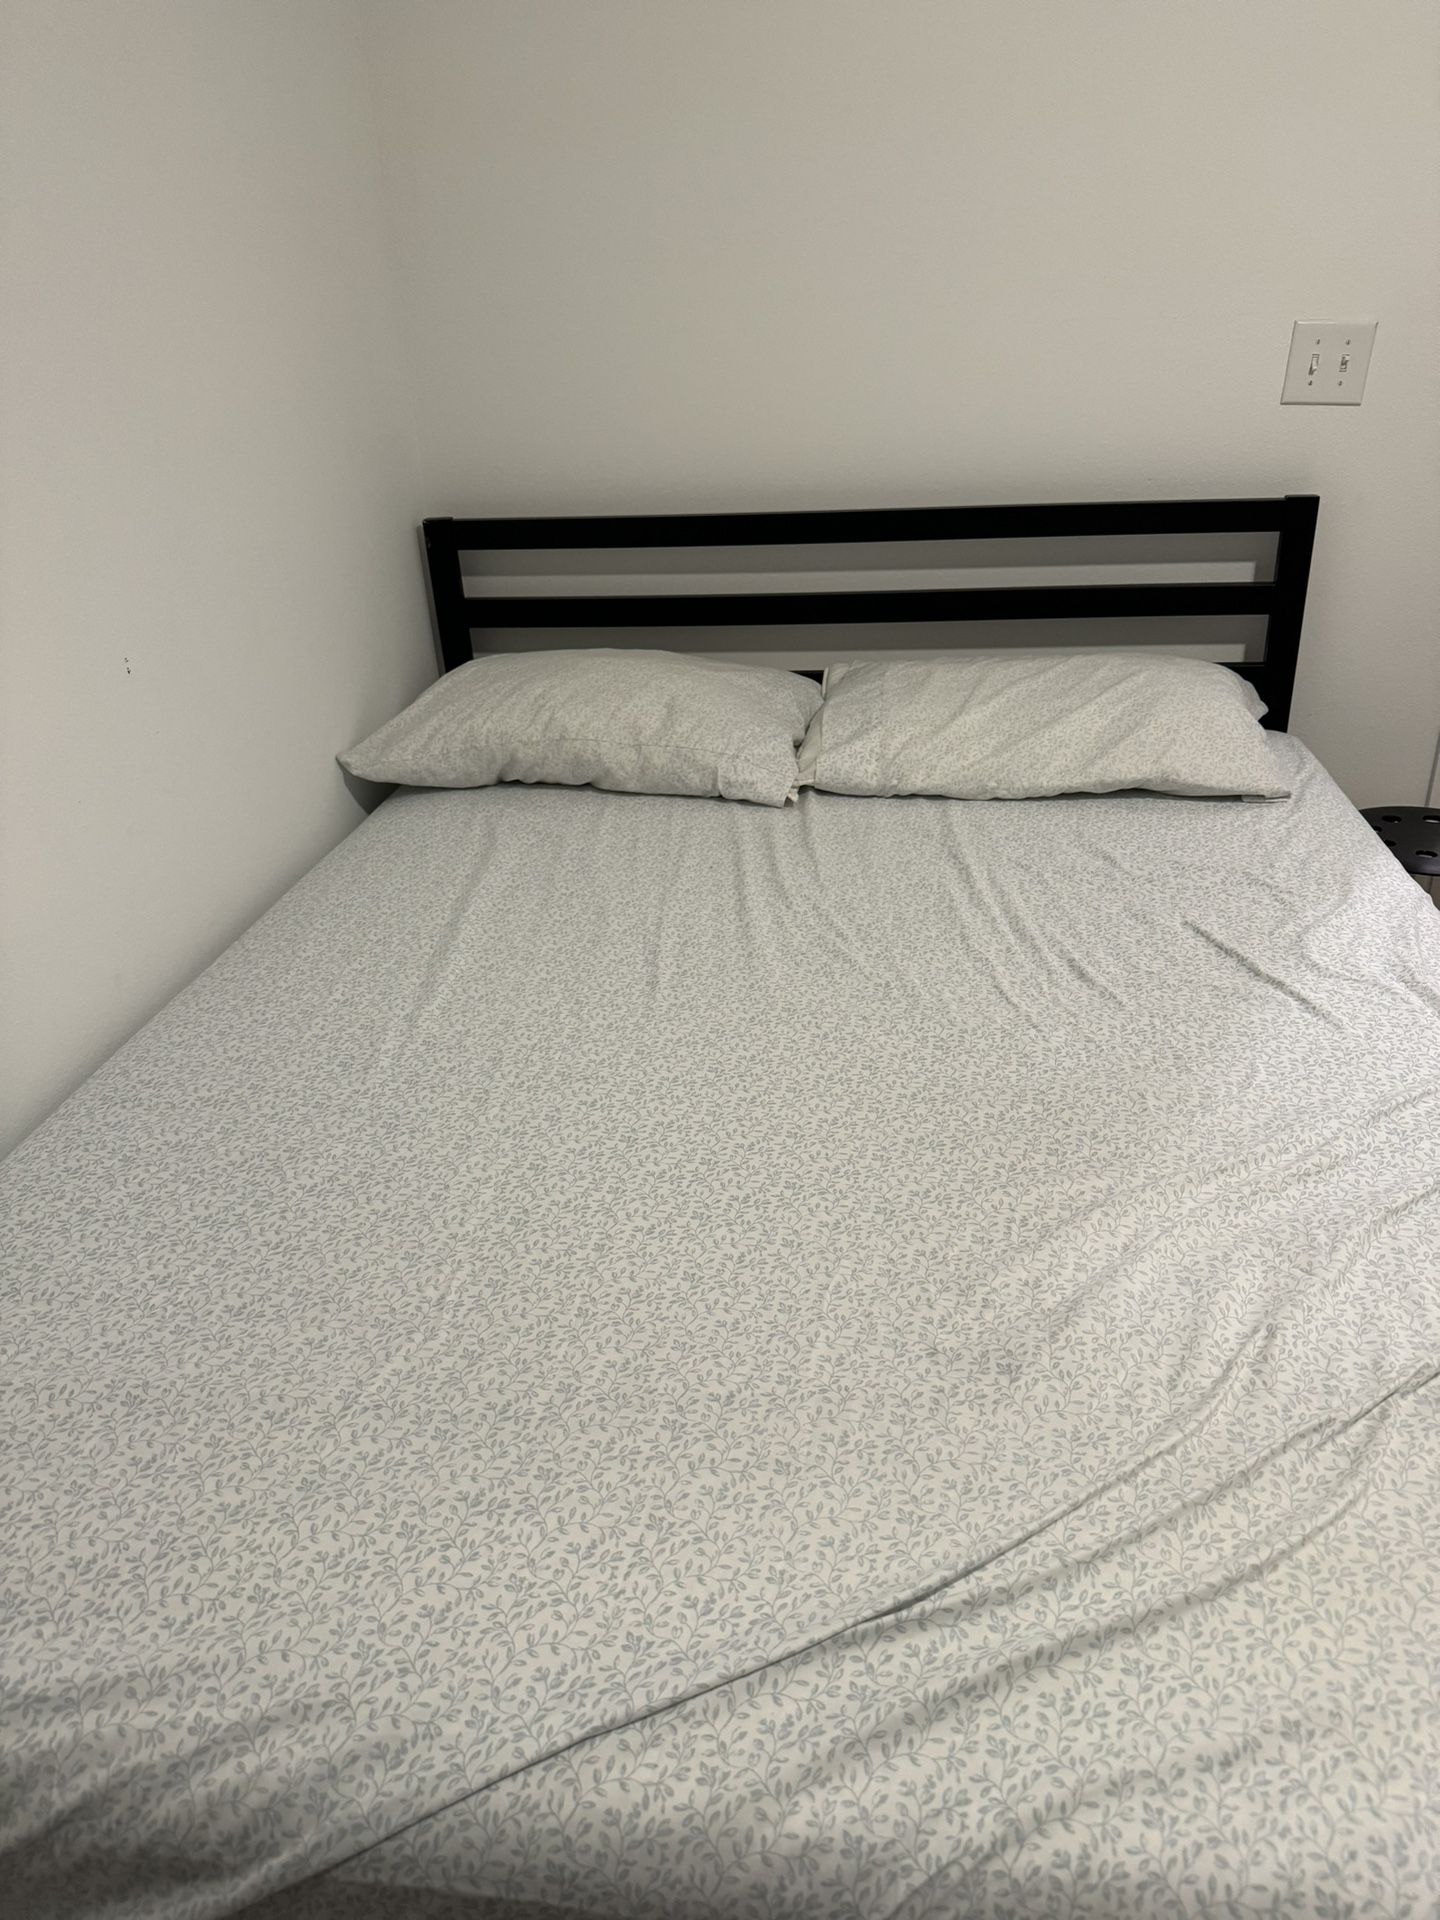 Queen Bed Frame Used 